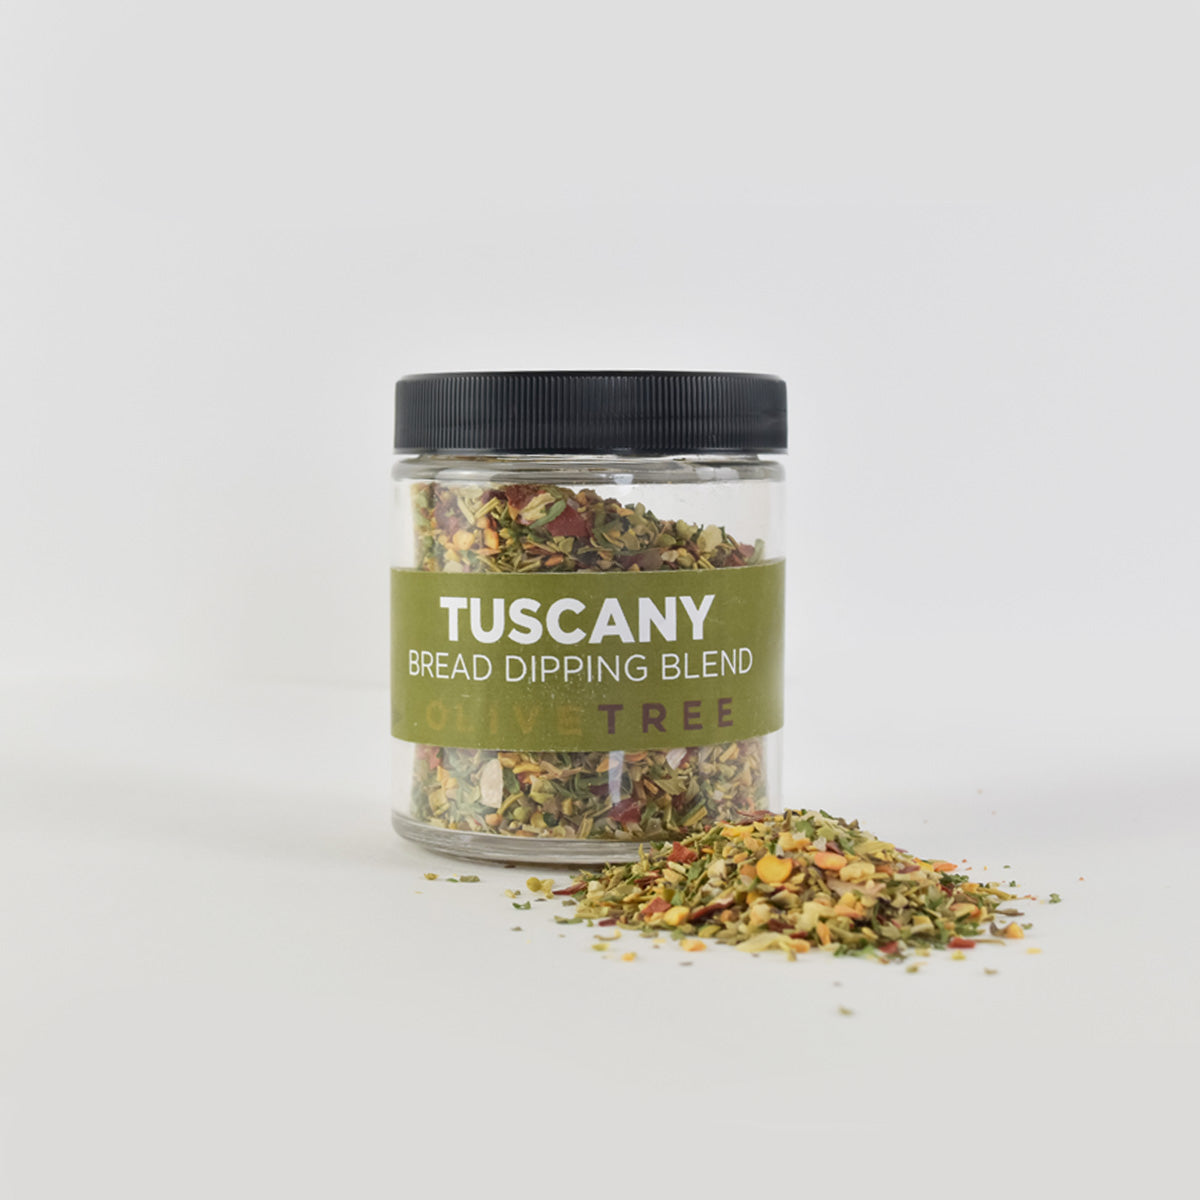 Tuscany Bread Dipping Blend